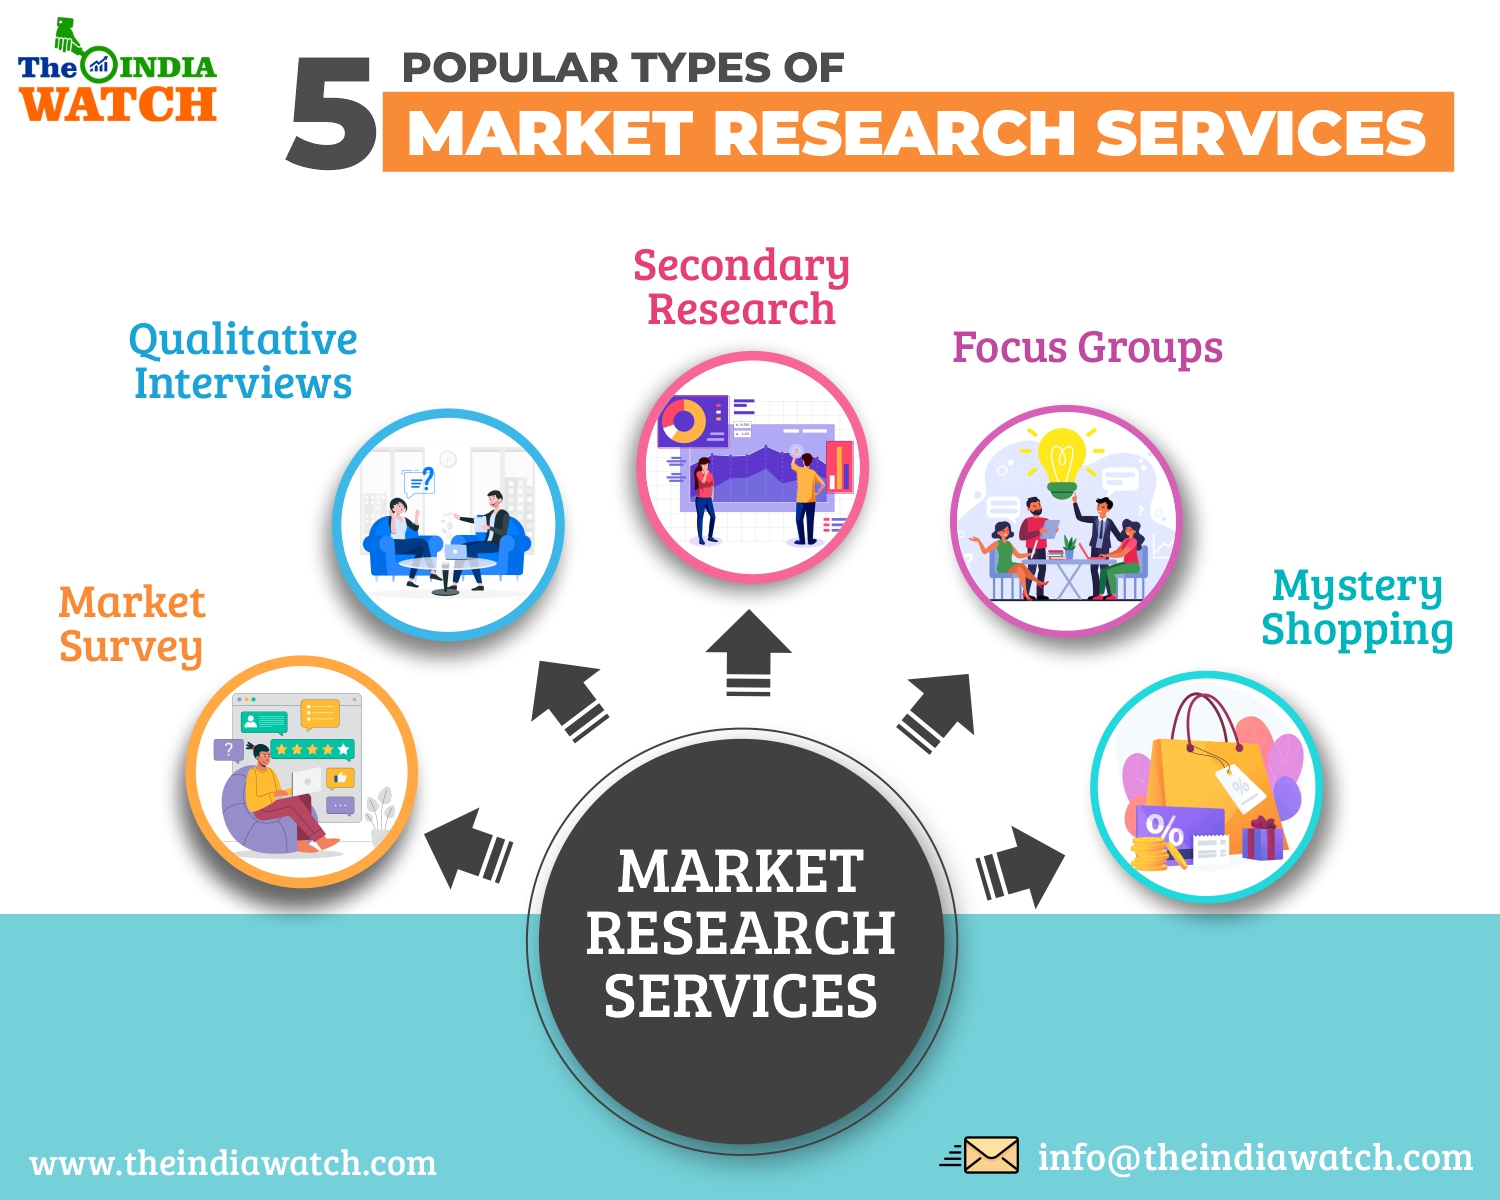 5 Popular Types of Market Research Services